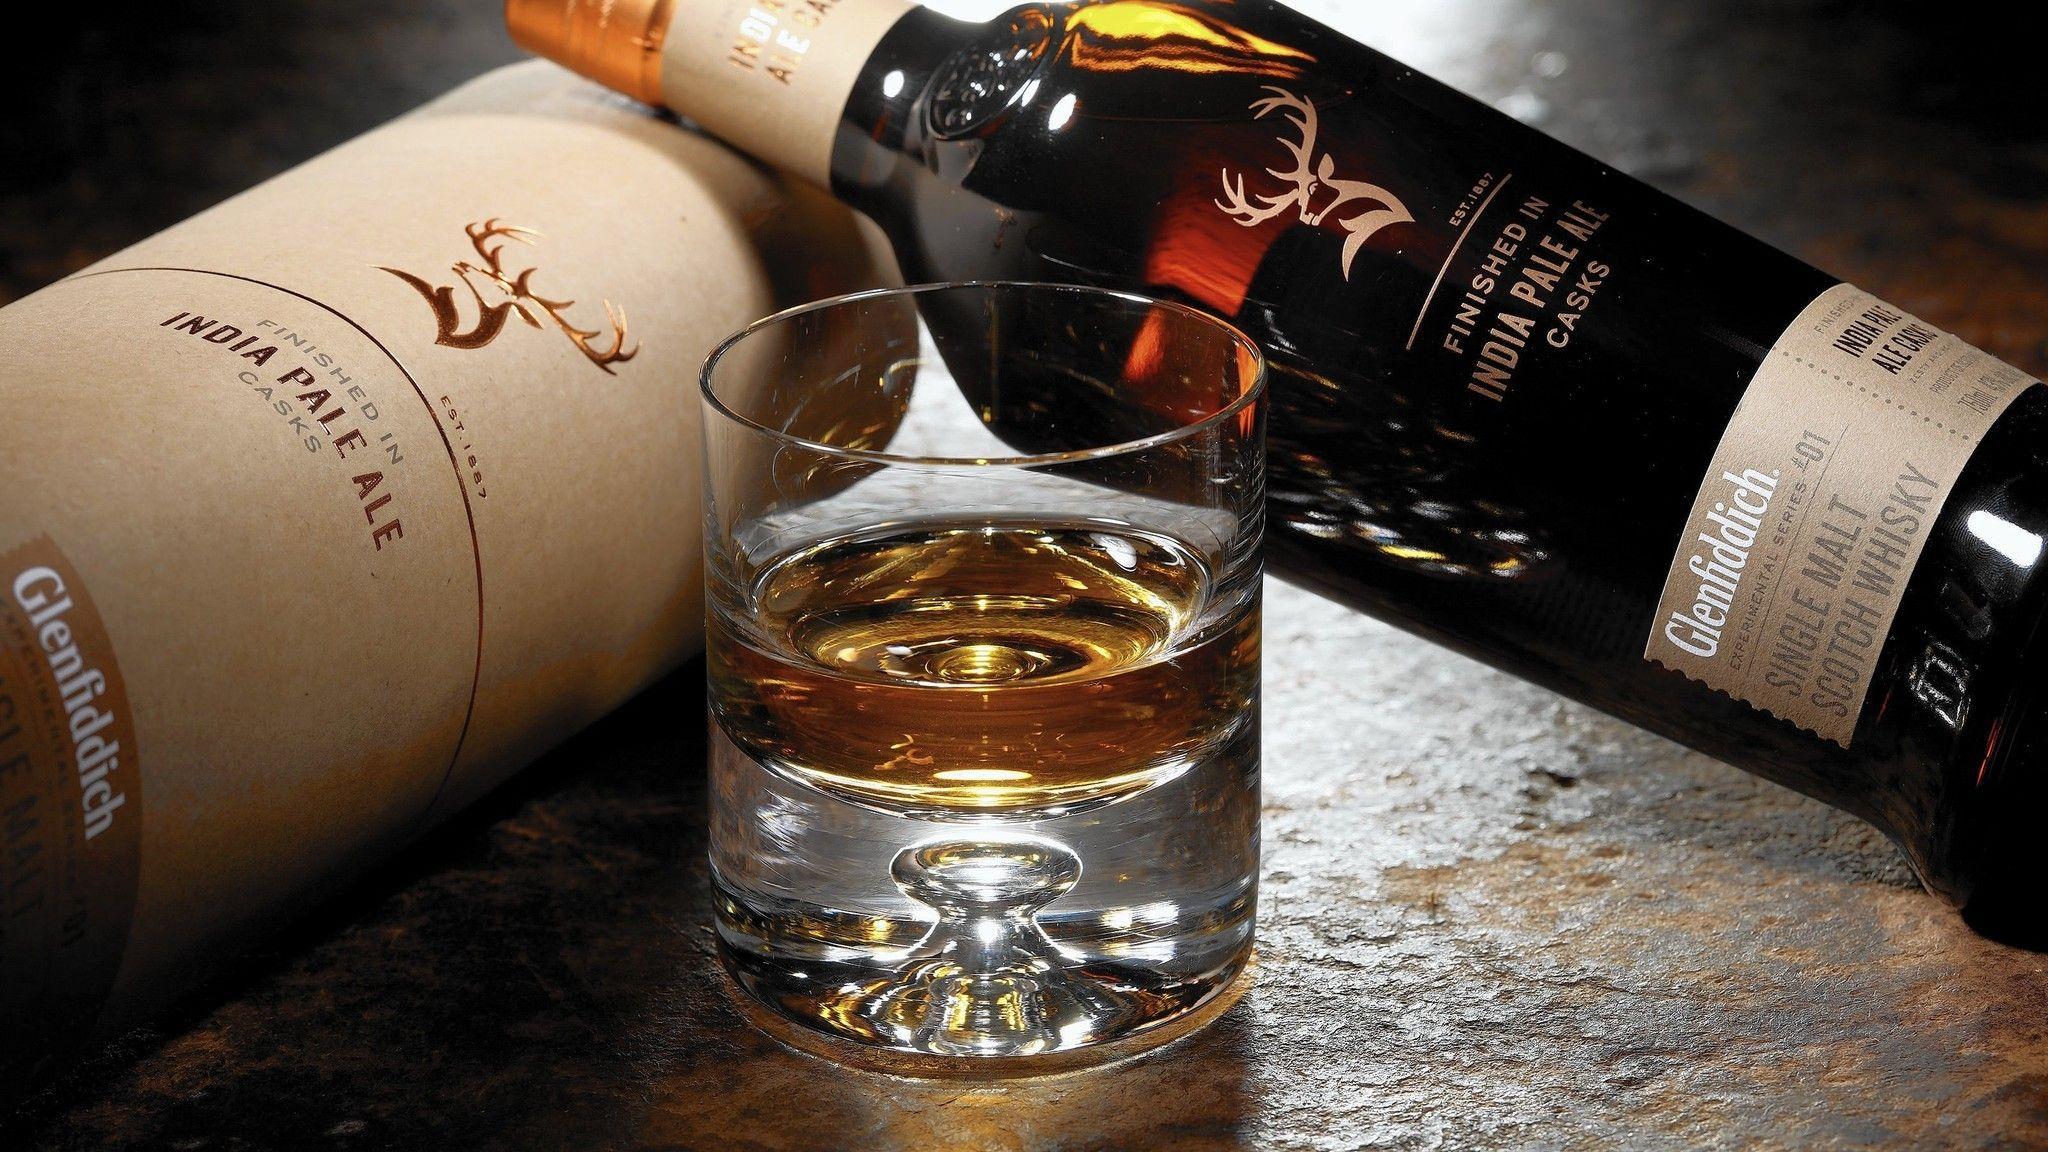 Scotch with a hint of IPA, what? Glenfiddich experiments with newest